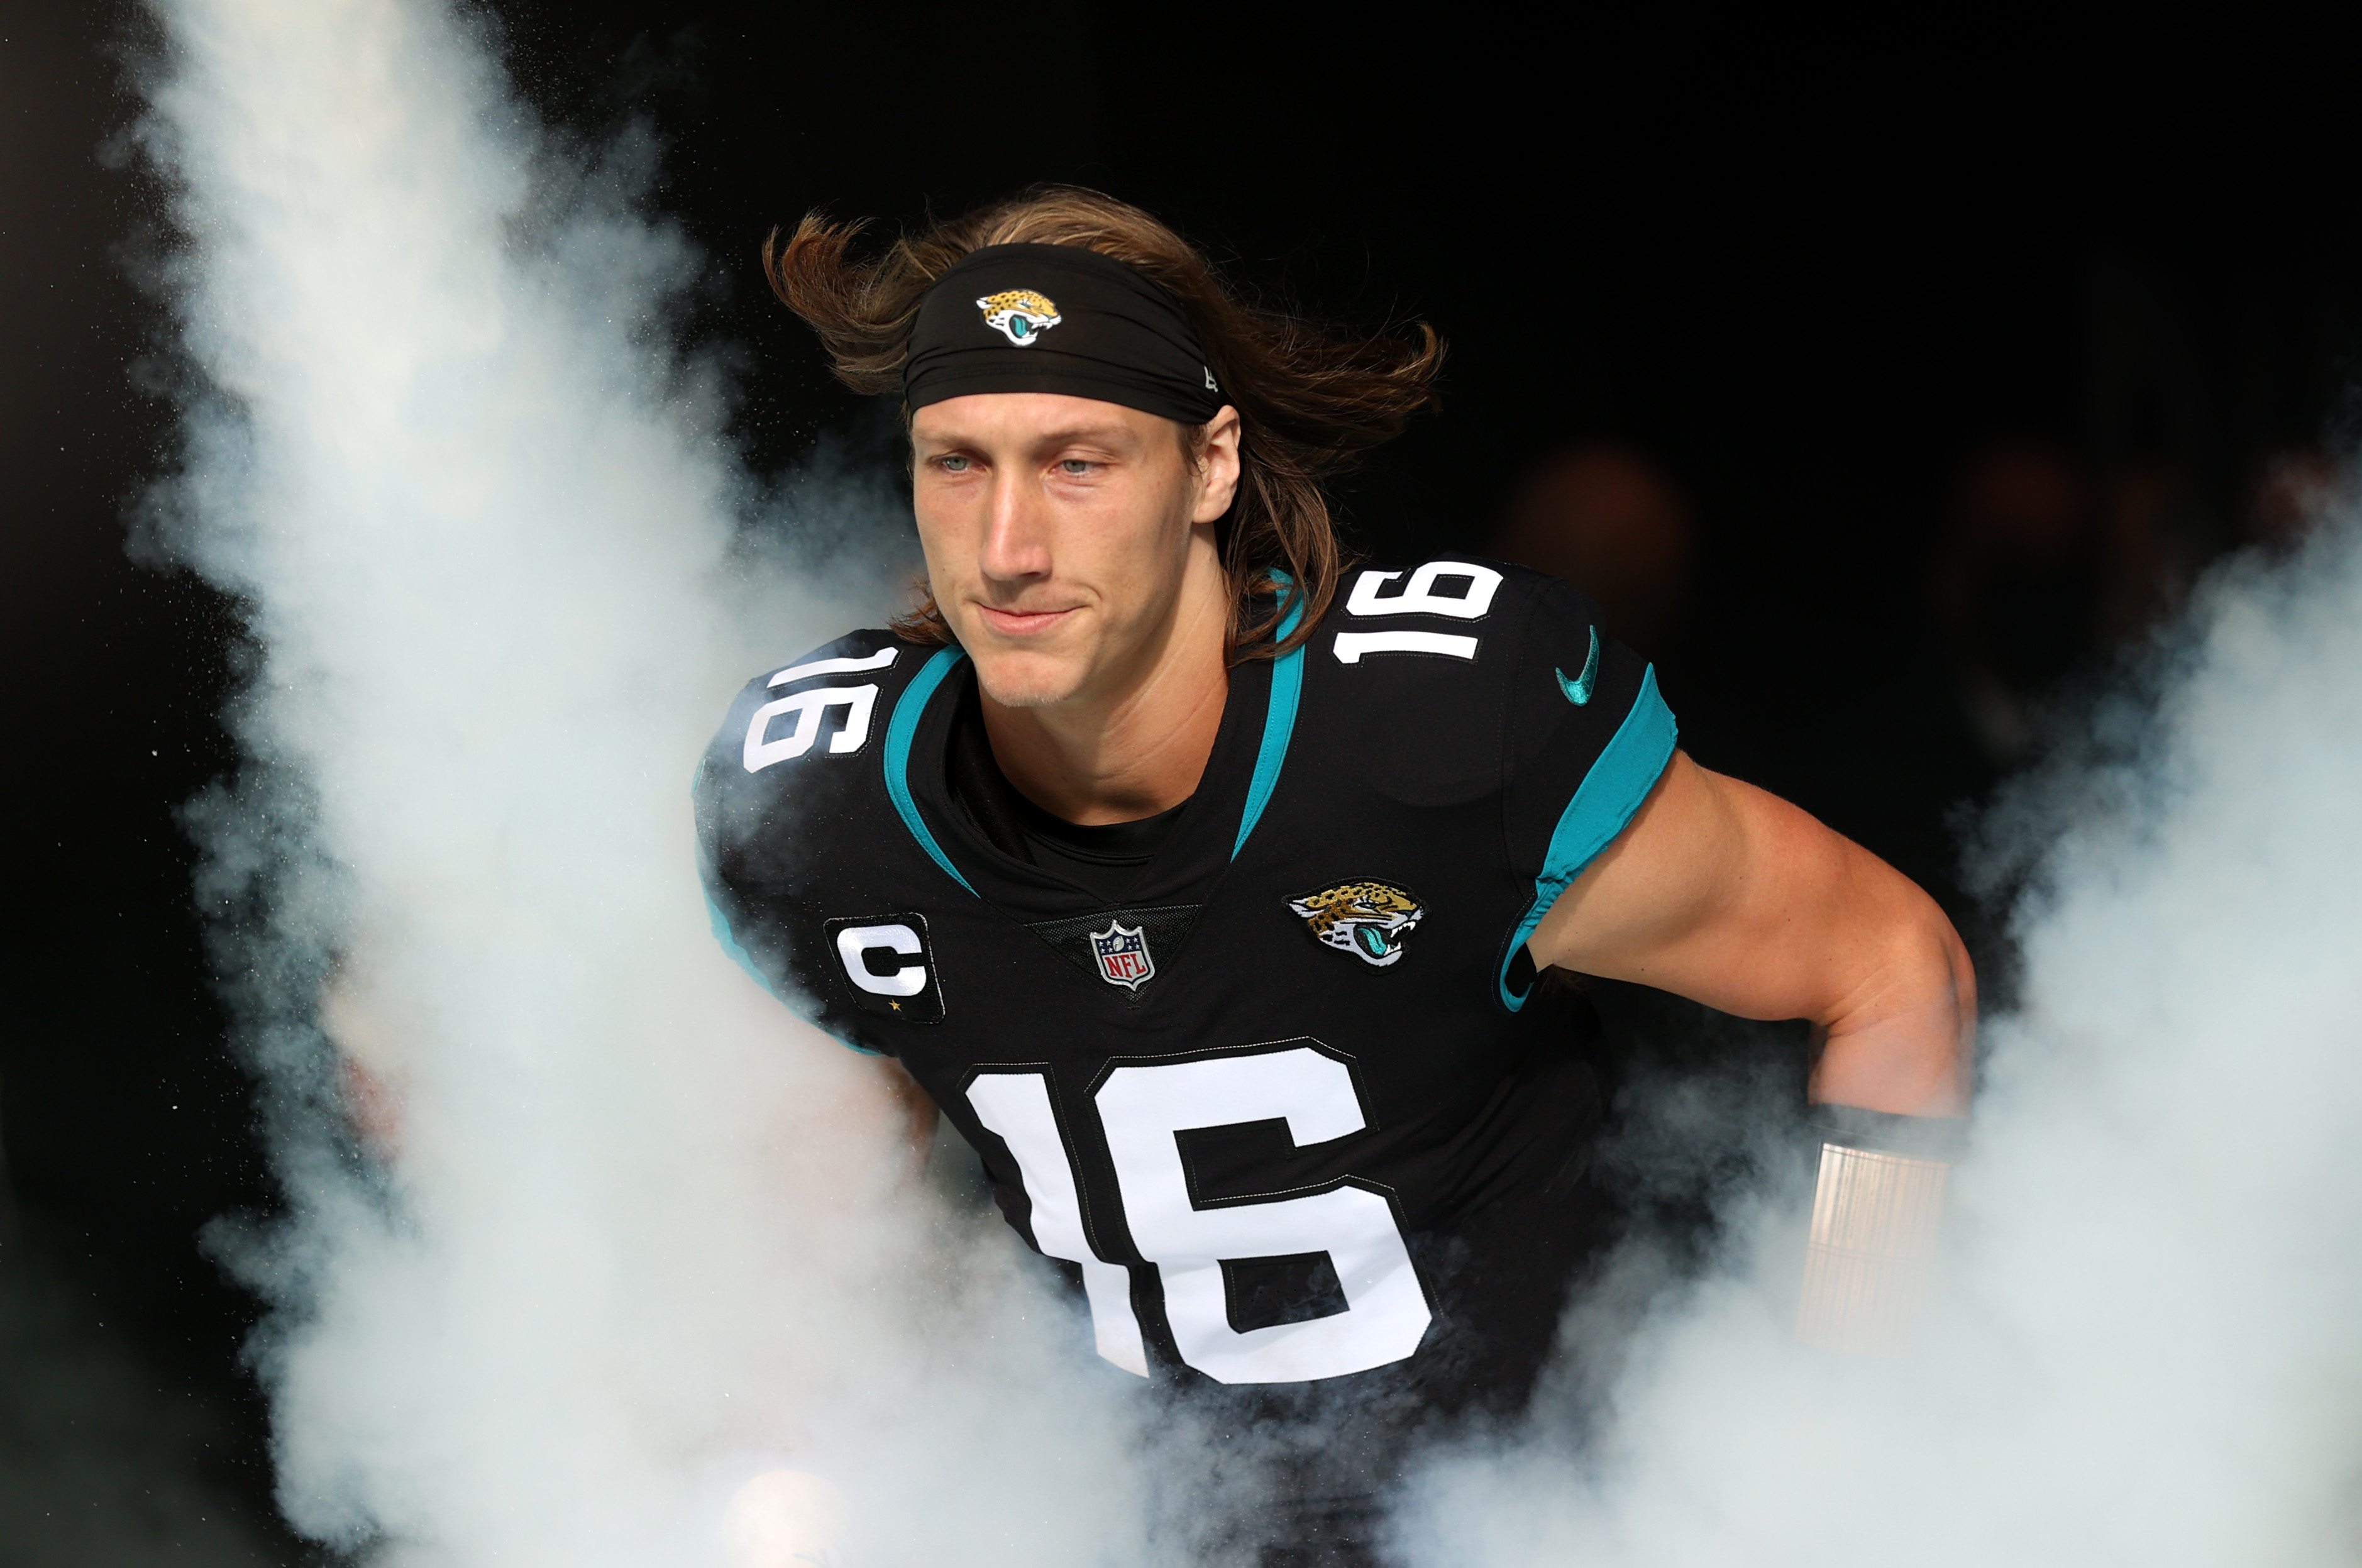 Trevor Lawrence of The Jacksonville Jaguars enters play during the NFL London 2021 match between Miami Dolphins and Jacksonville Jaguars at Tottenham Hotspur Stadium on October 17, 2021 in London, England.